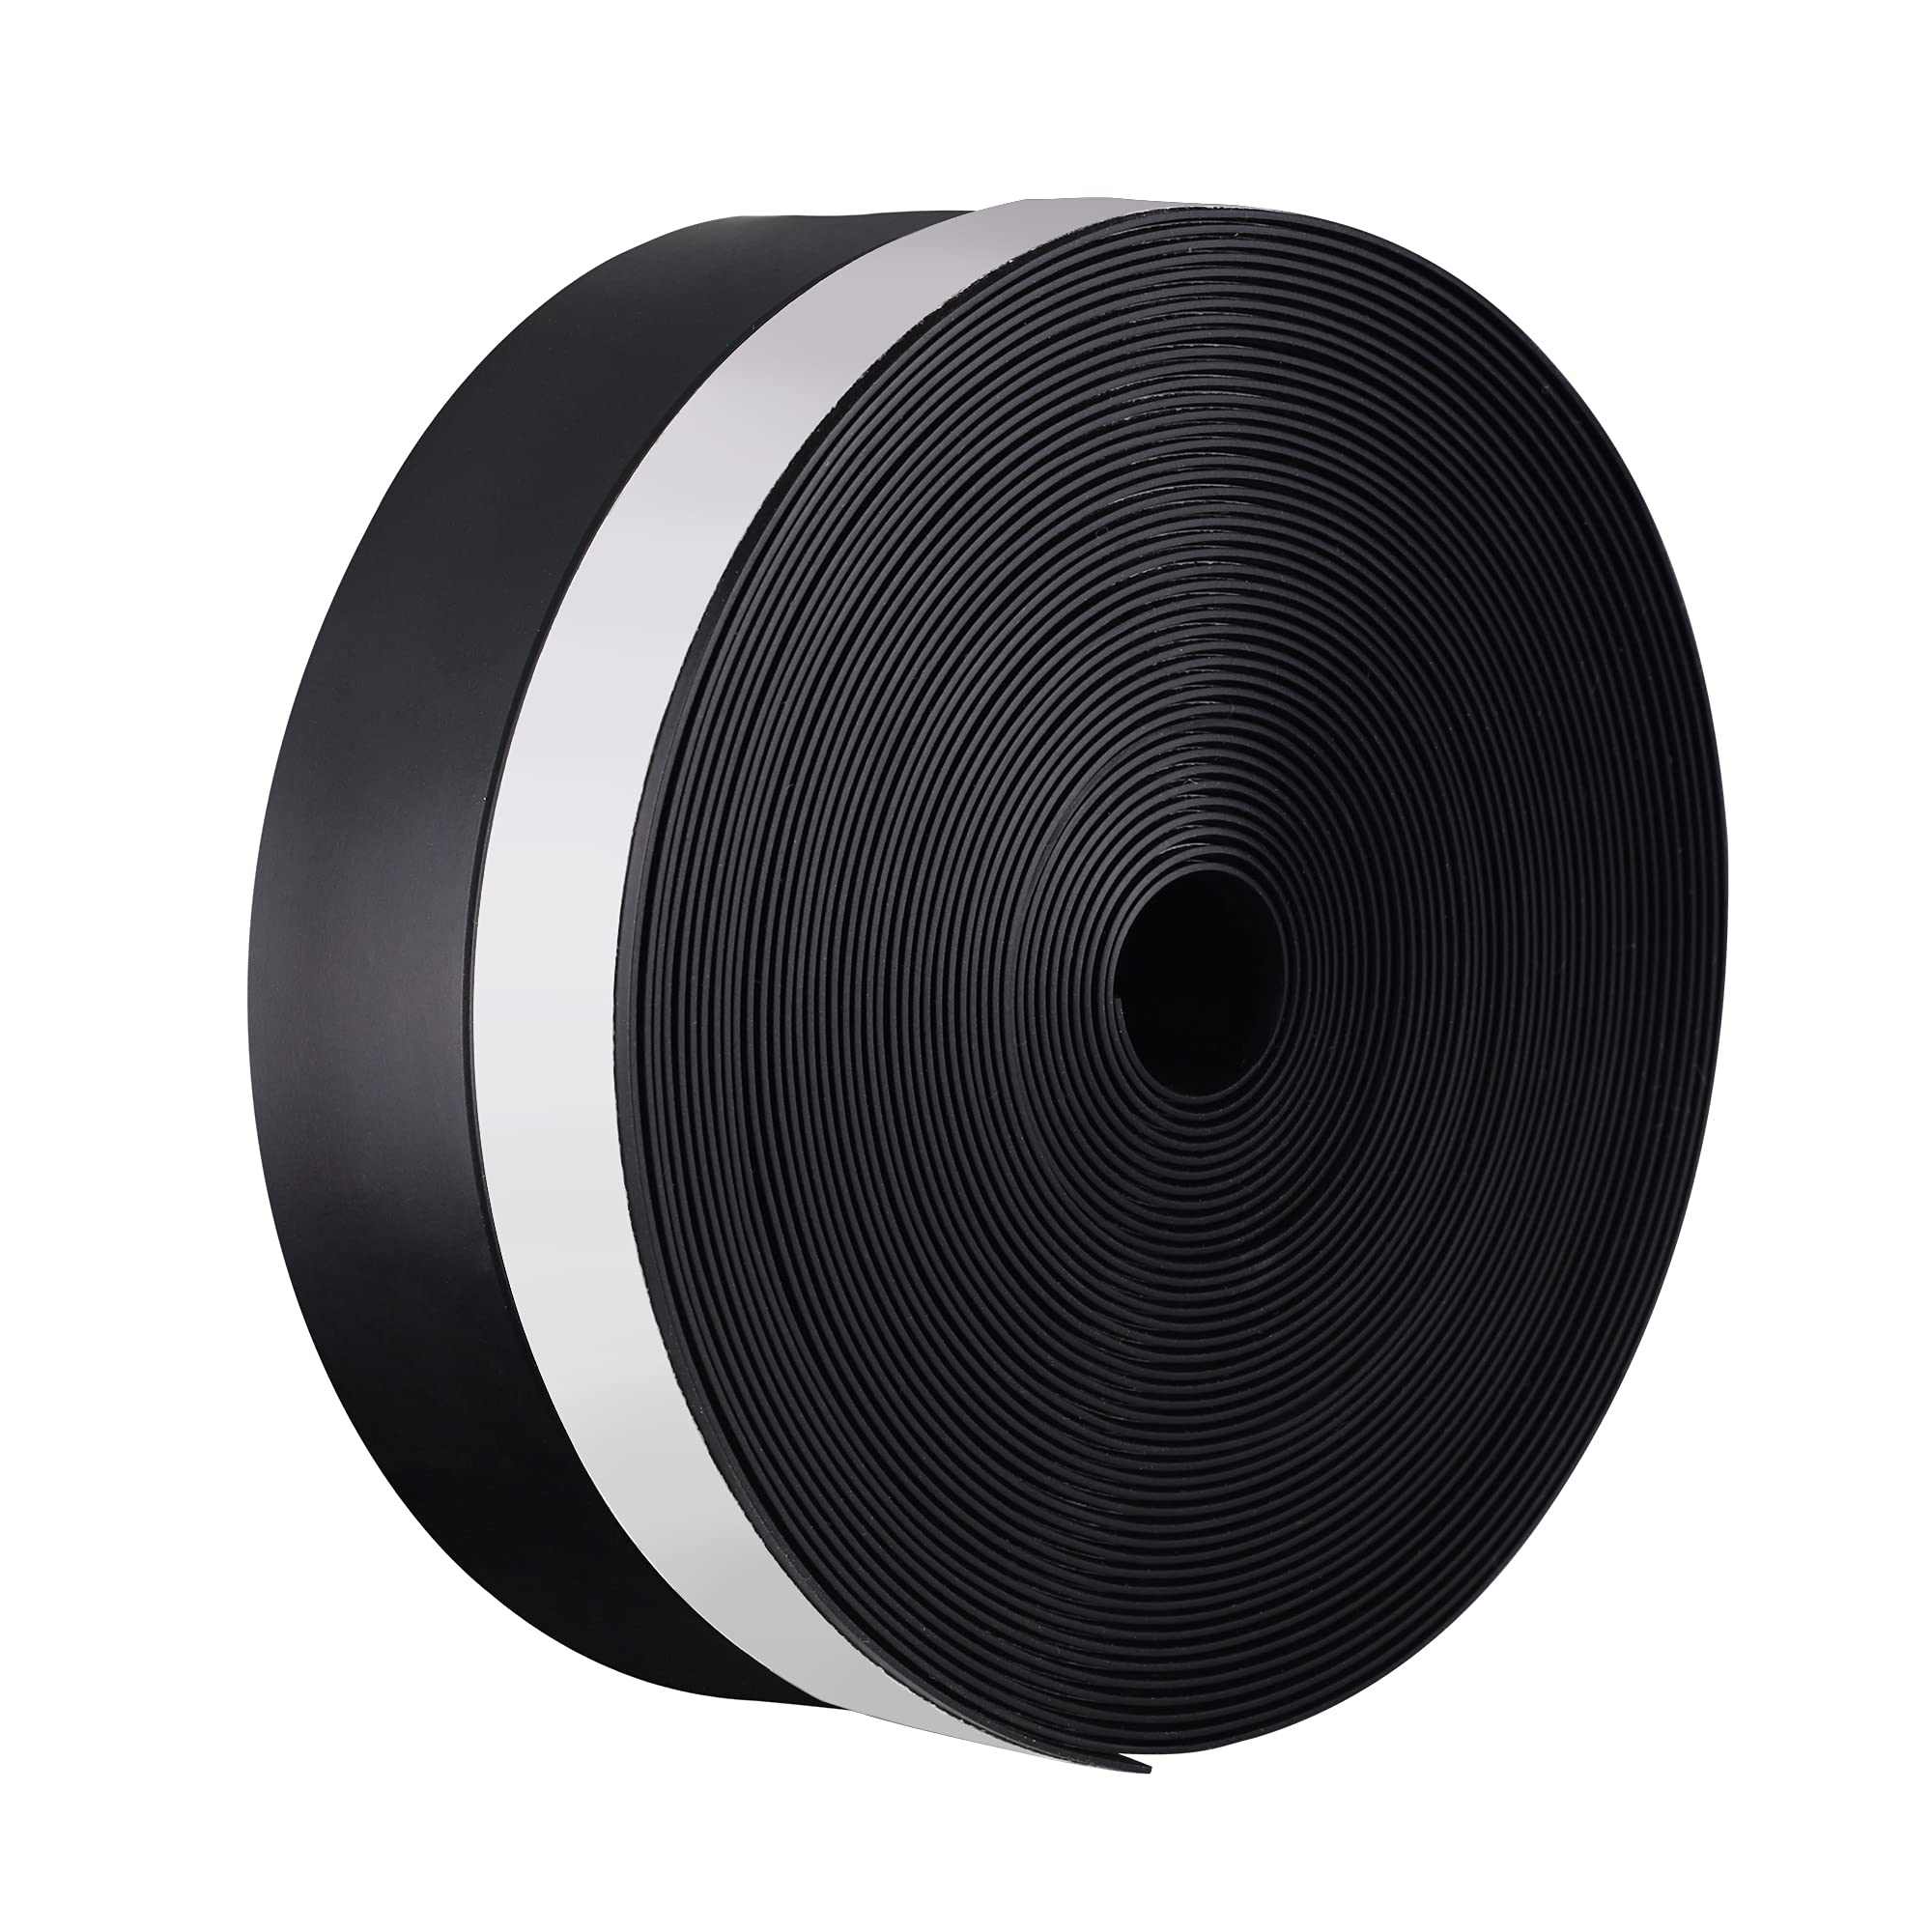 LLPT Weather Stripping Silicone Door Seal Strip 1.8” x 26 Feet Black Weather Stripping Tape with Adhesive for Door Sealing Windo